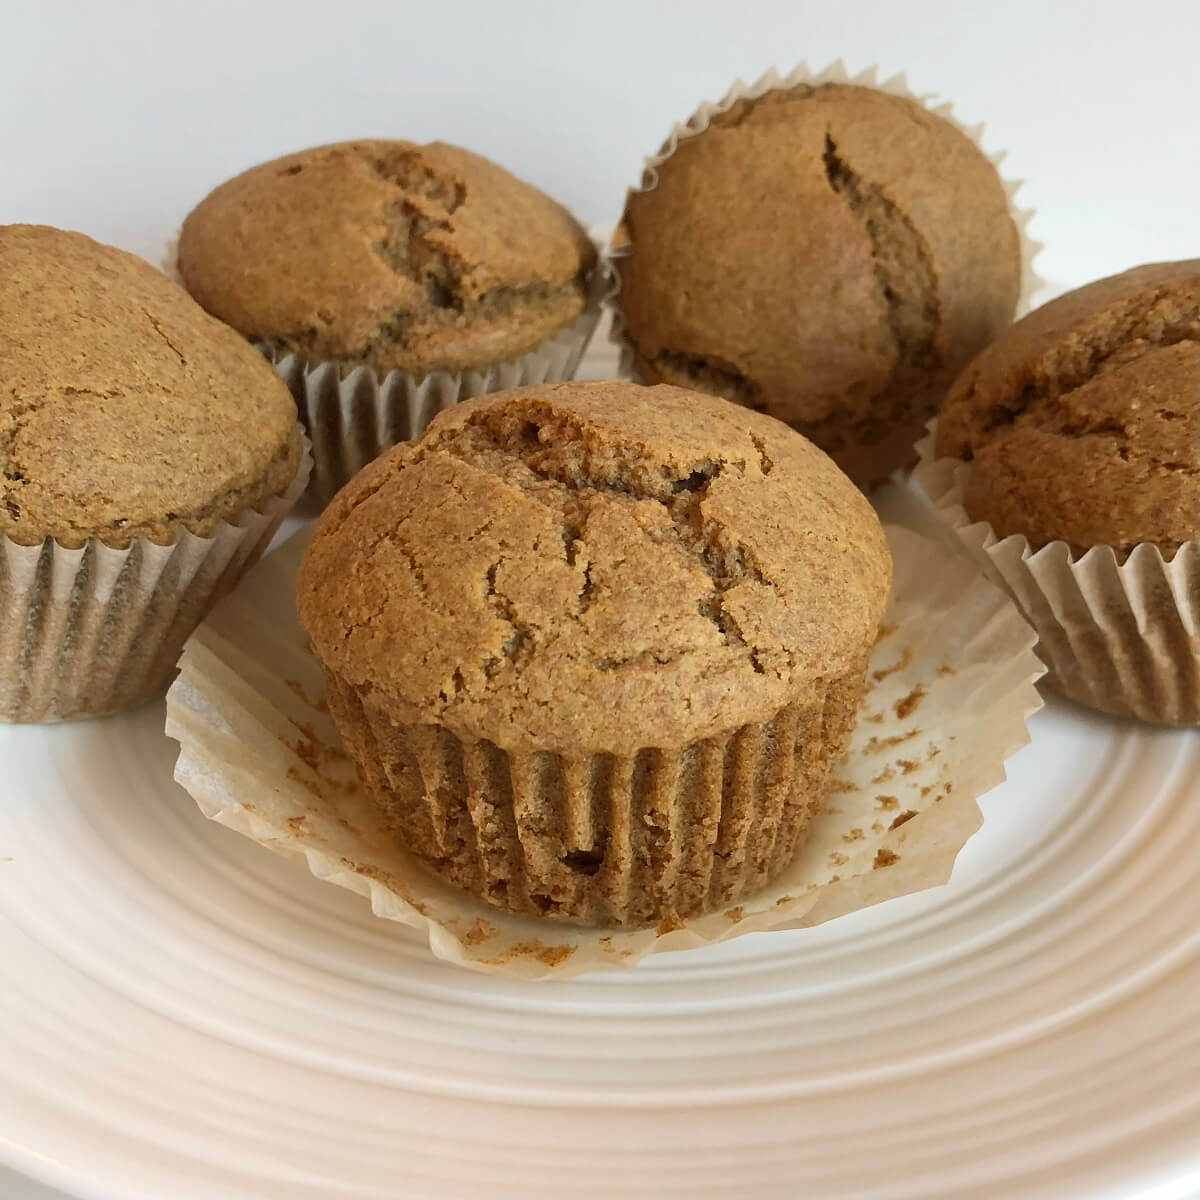 Five muffins made with spelt flour on a white plate.